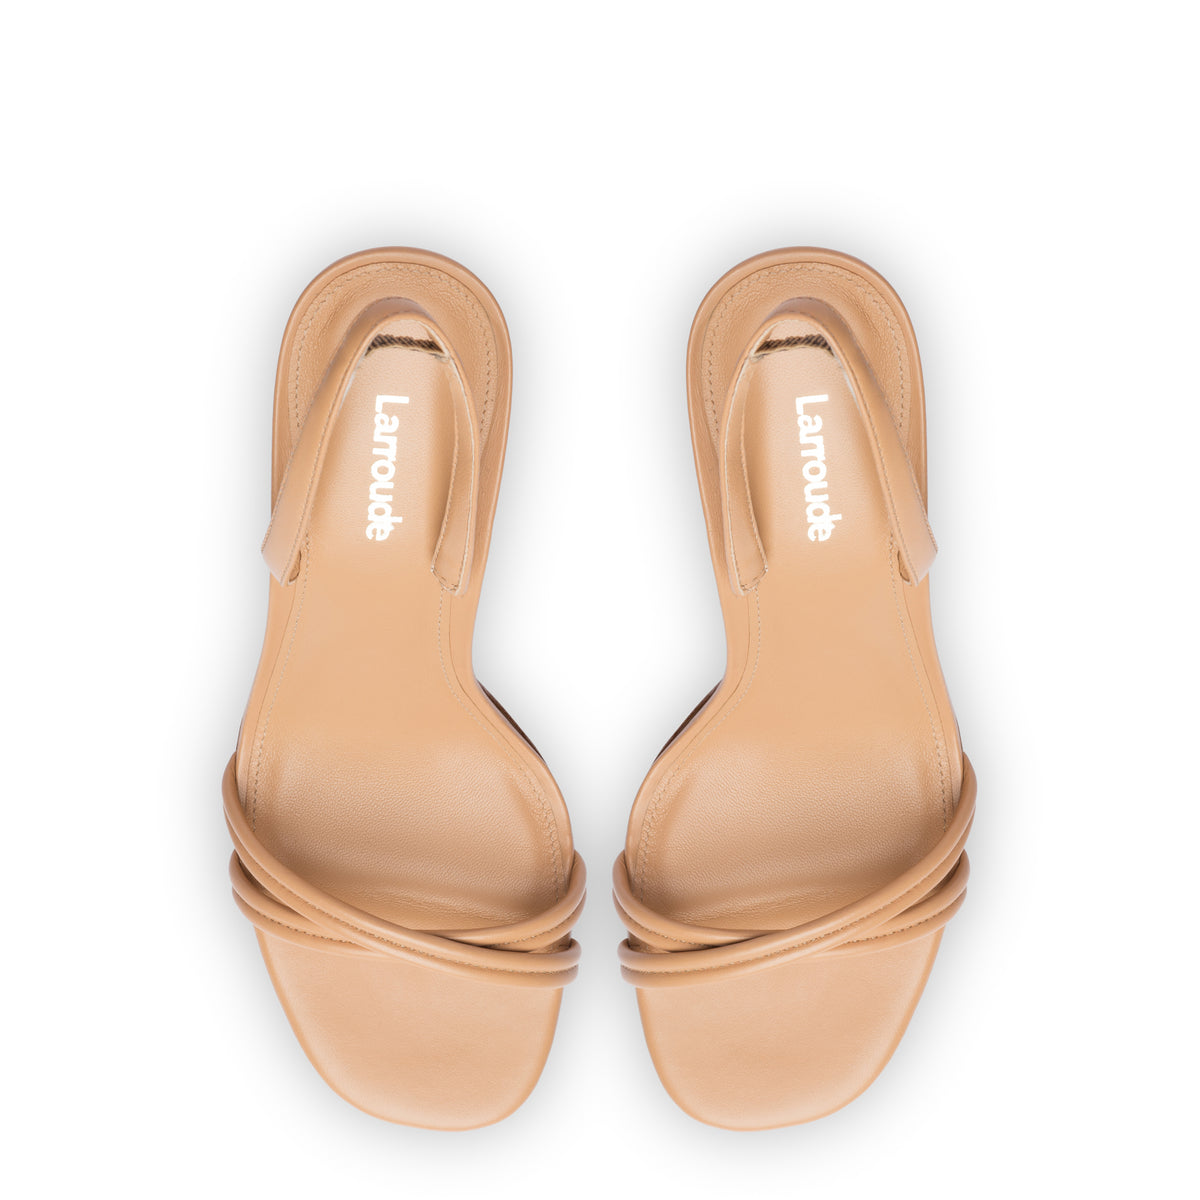 Annie Sandal In Tan Leather